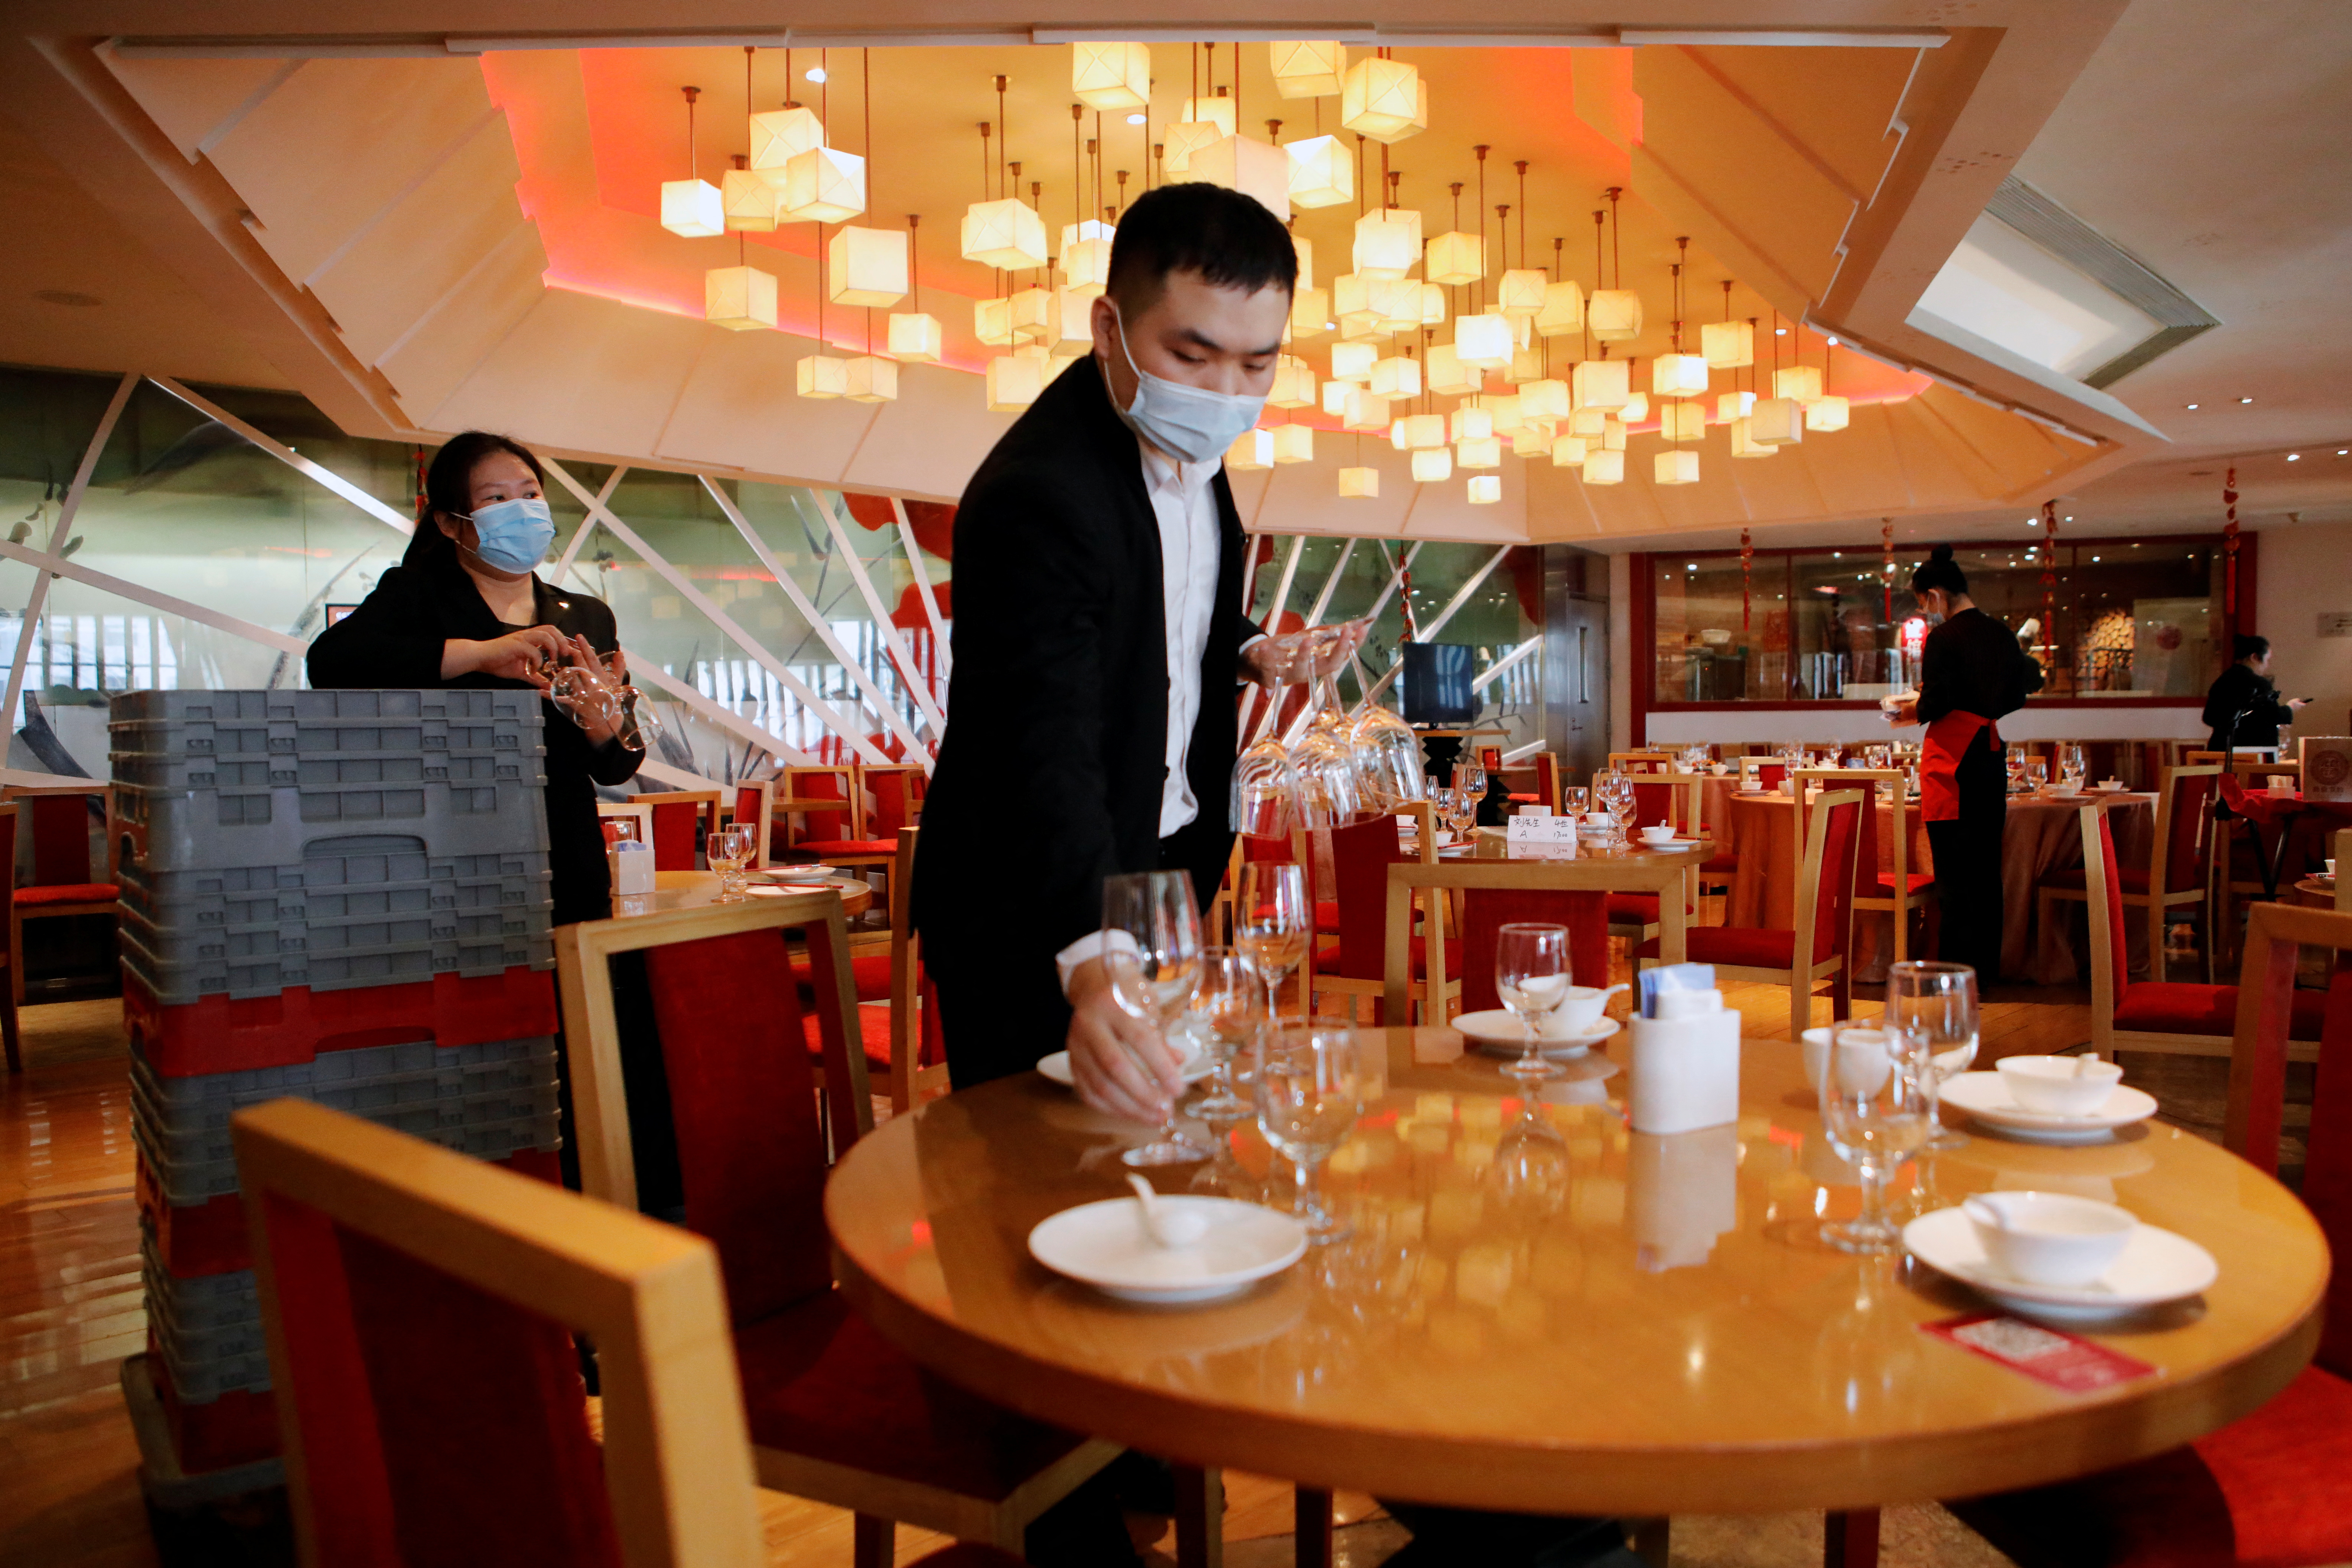 Lunar New Year's Eve dinner service at The Red Chamber restaurant in Beijing